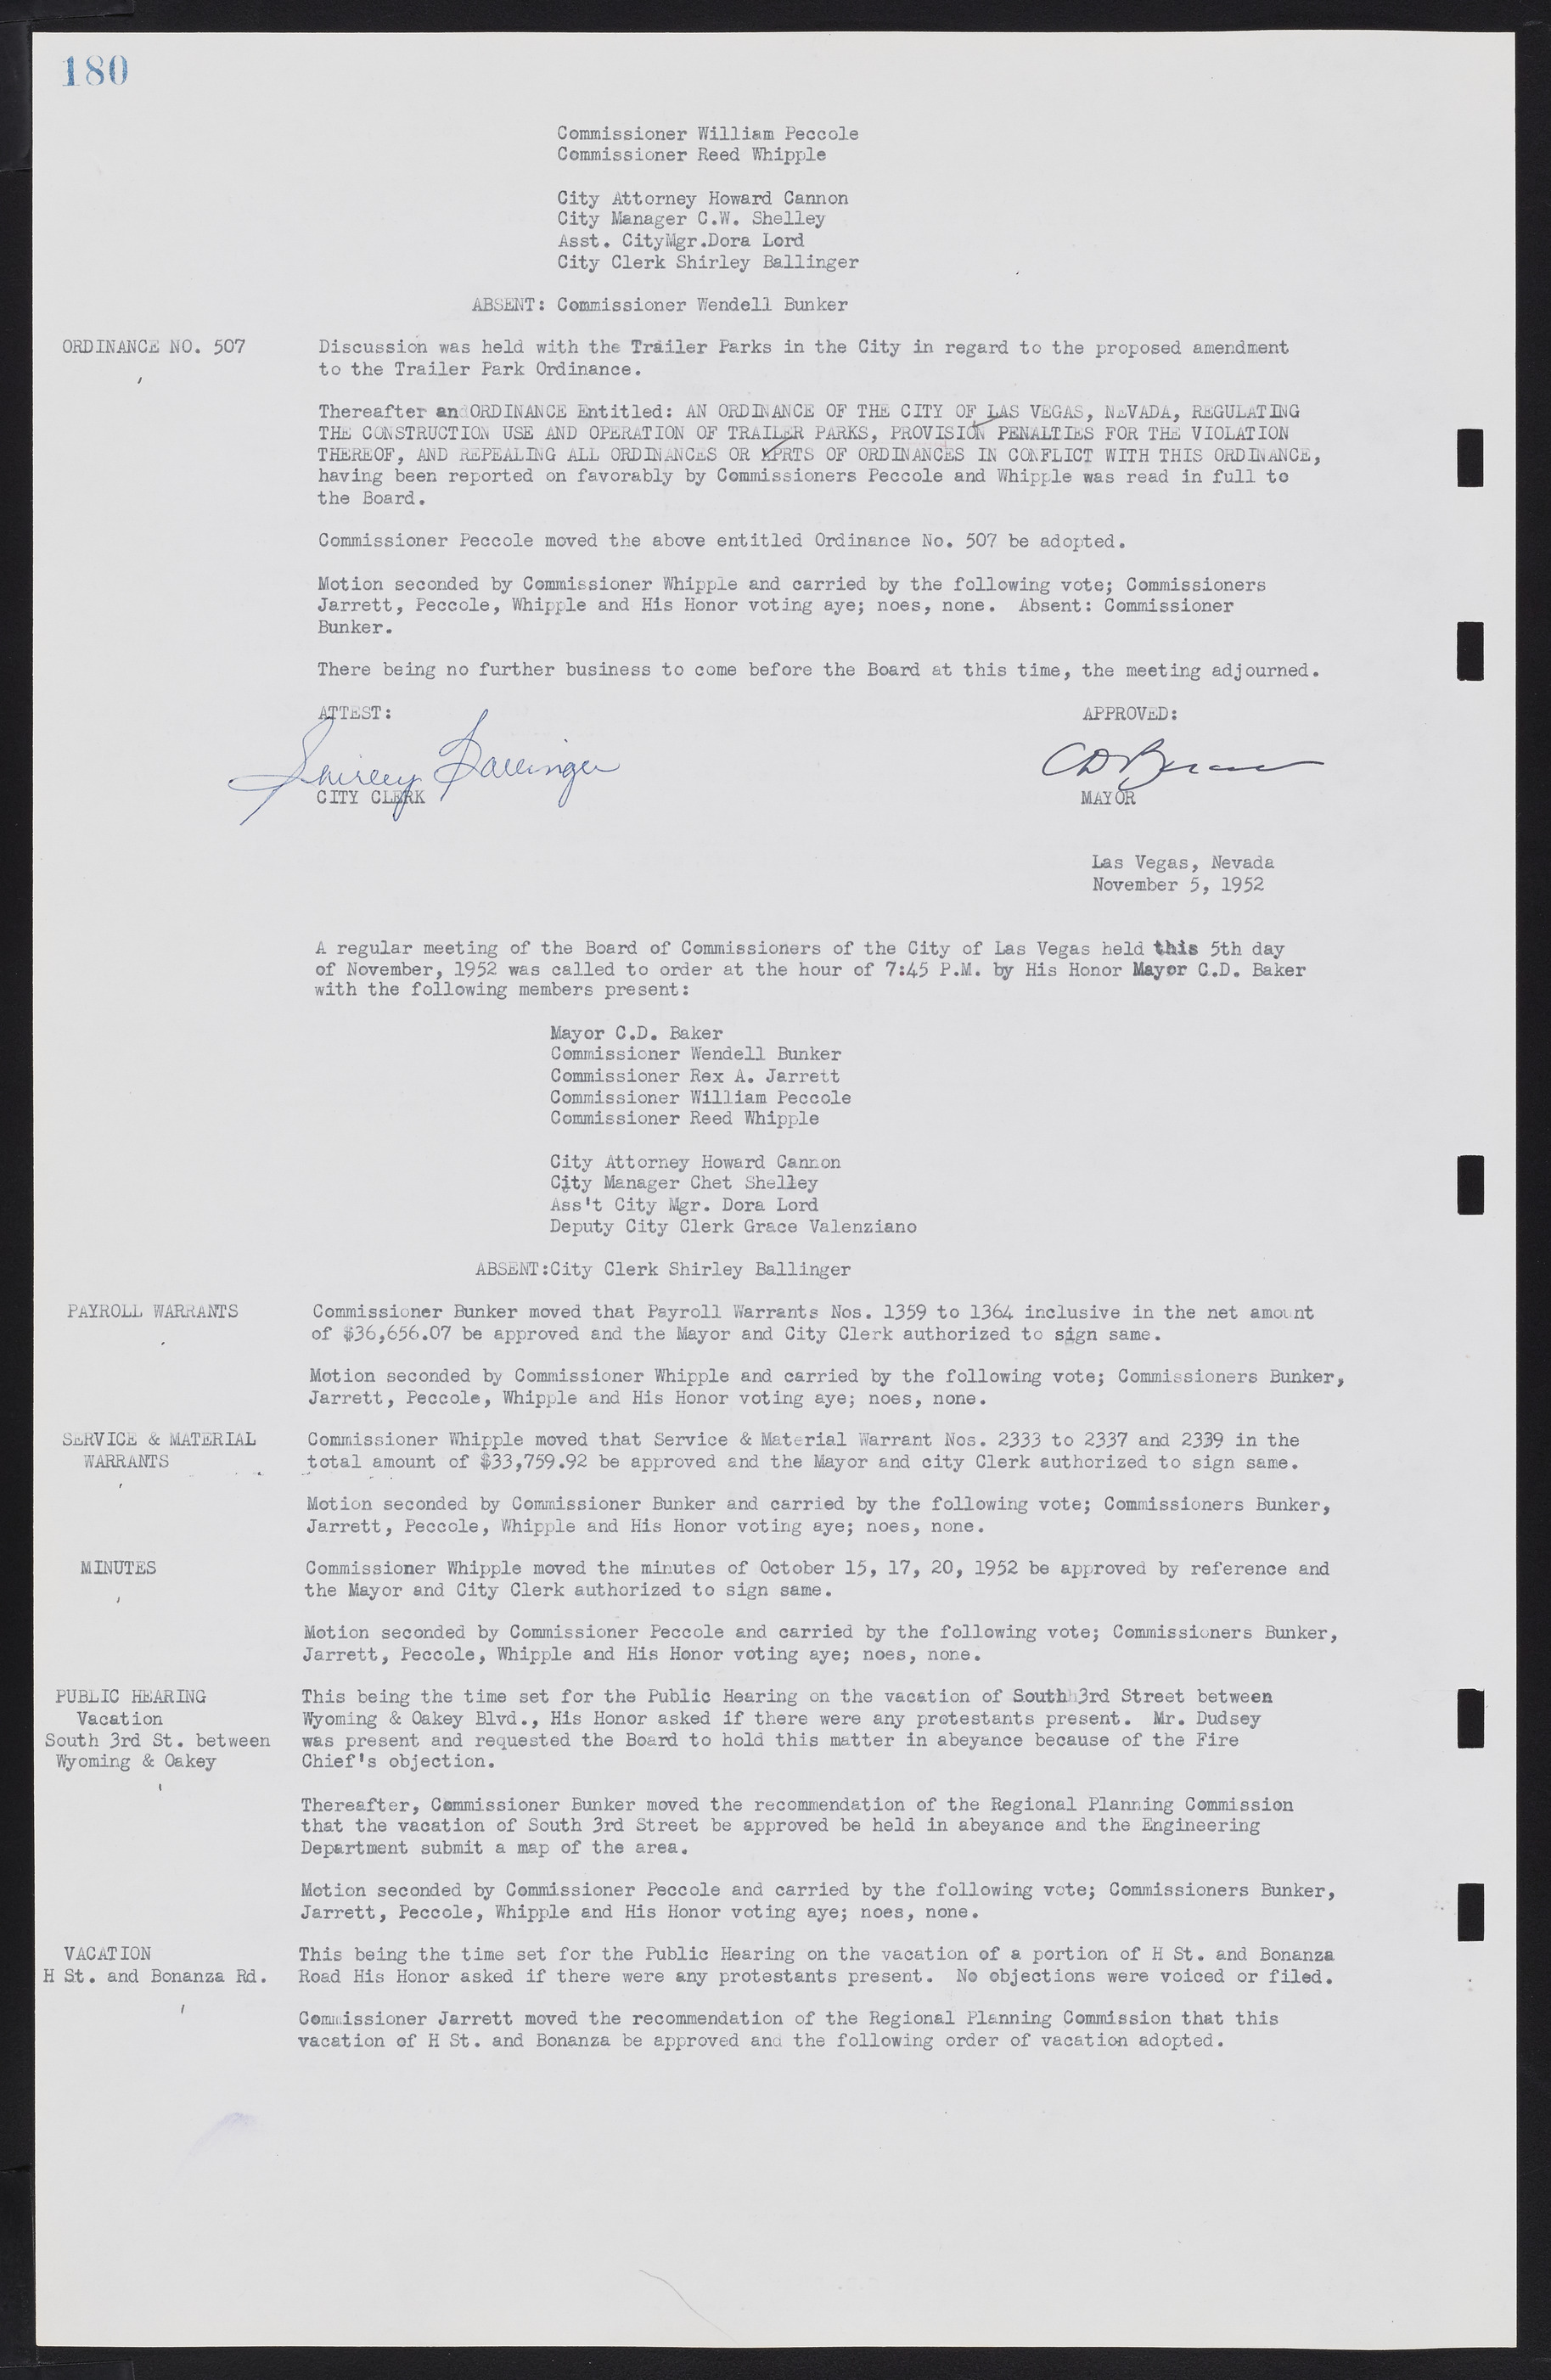 Las Vegas City Commission Minutes, May 26, 1952 to February 17, 1954, lvc000008-194